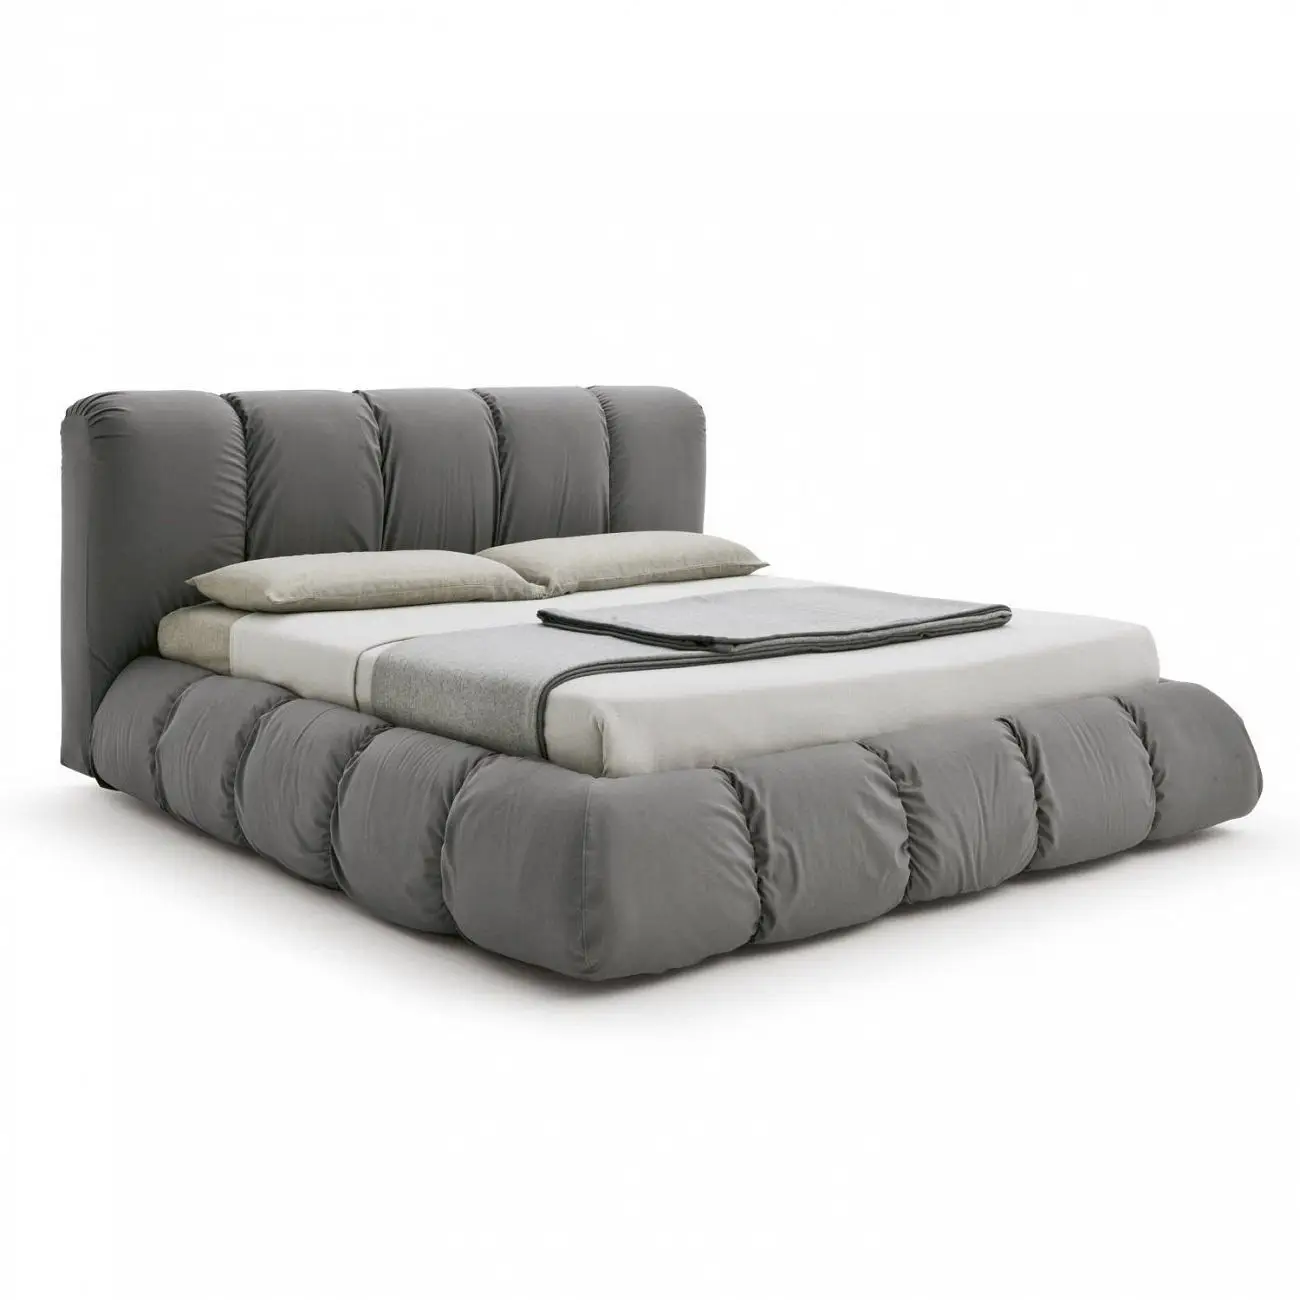 Double bed with upholstered headboard 180x200 cm gray Mobili